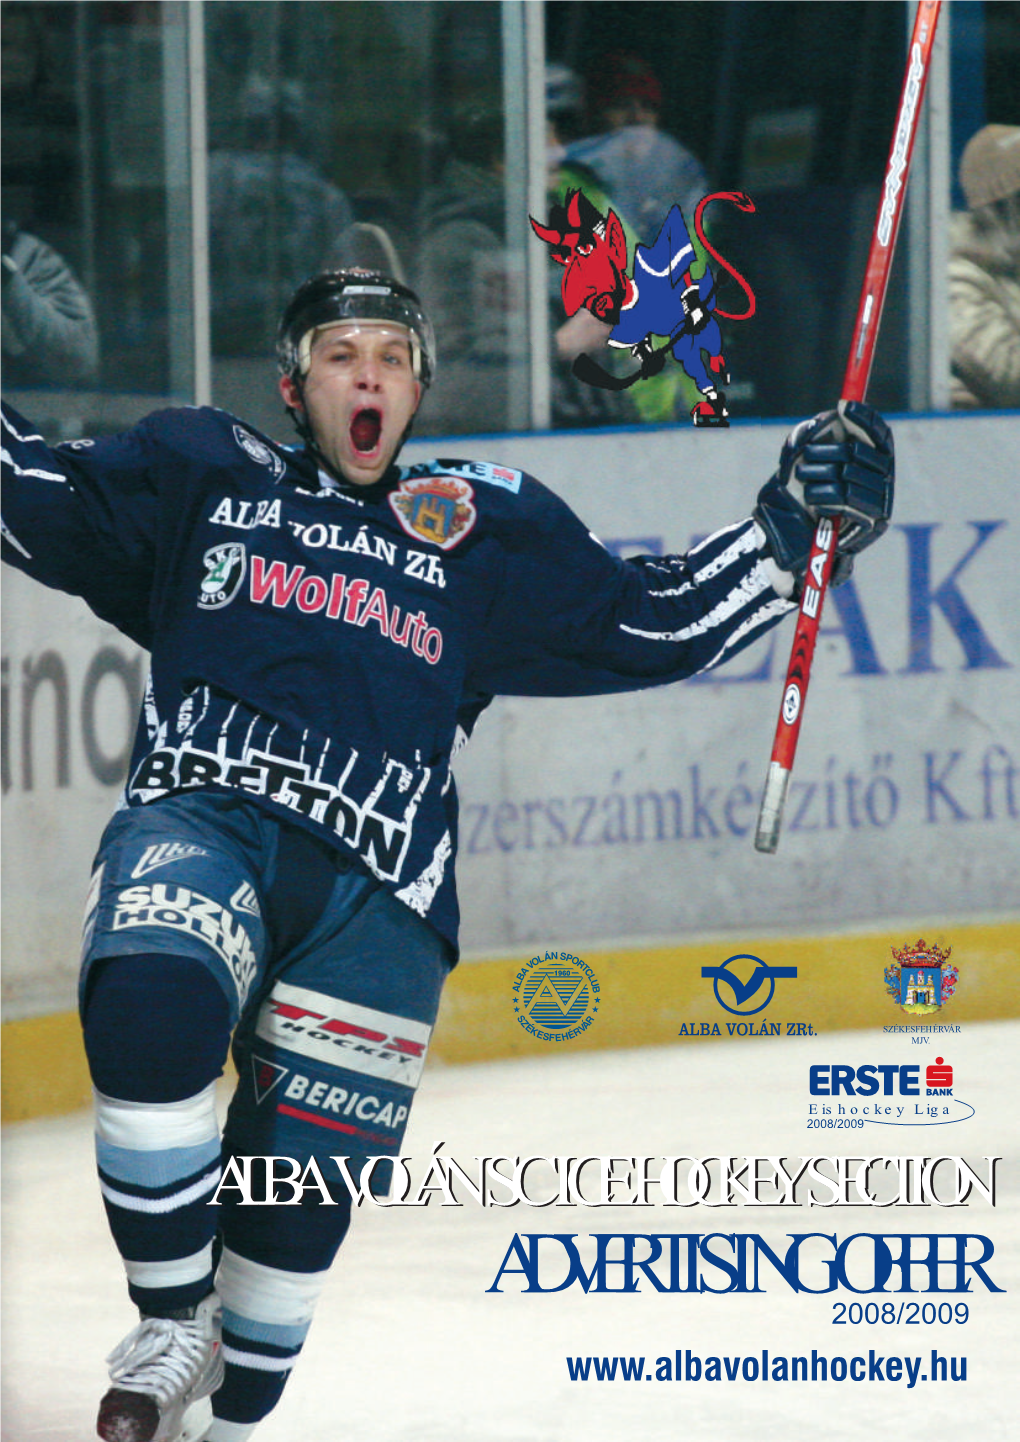 Advertising Offer 2008/2009 Erste Bank Ice Hockey League and Hungarian Championships